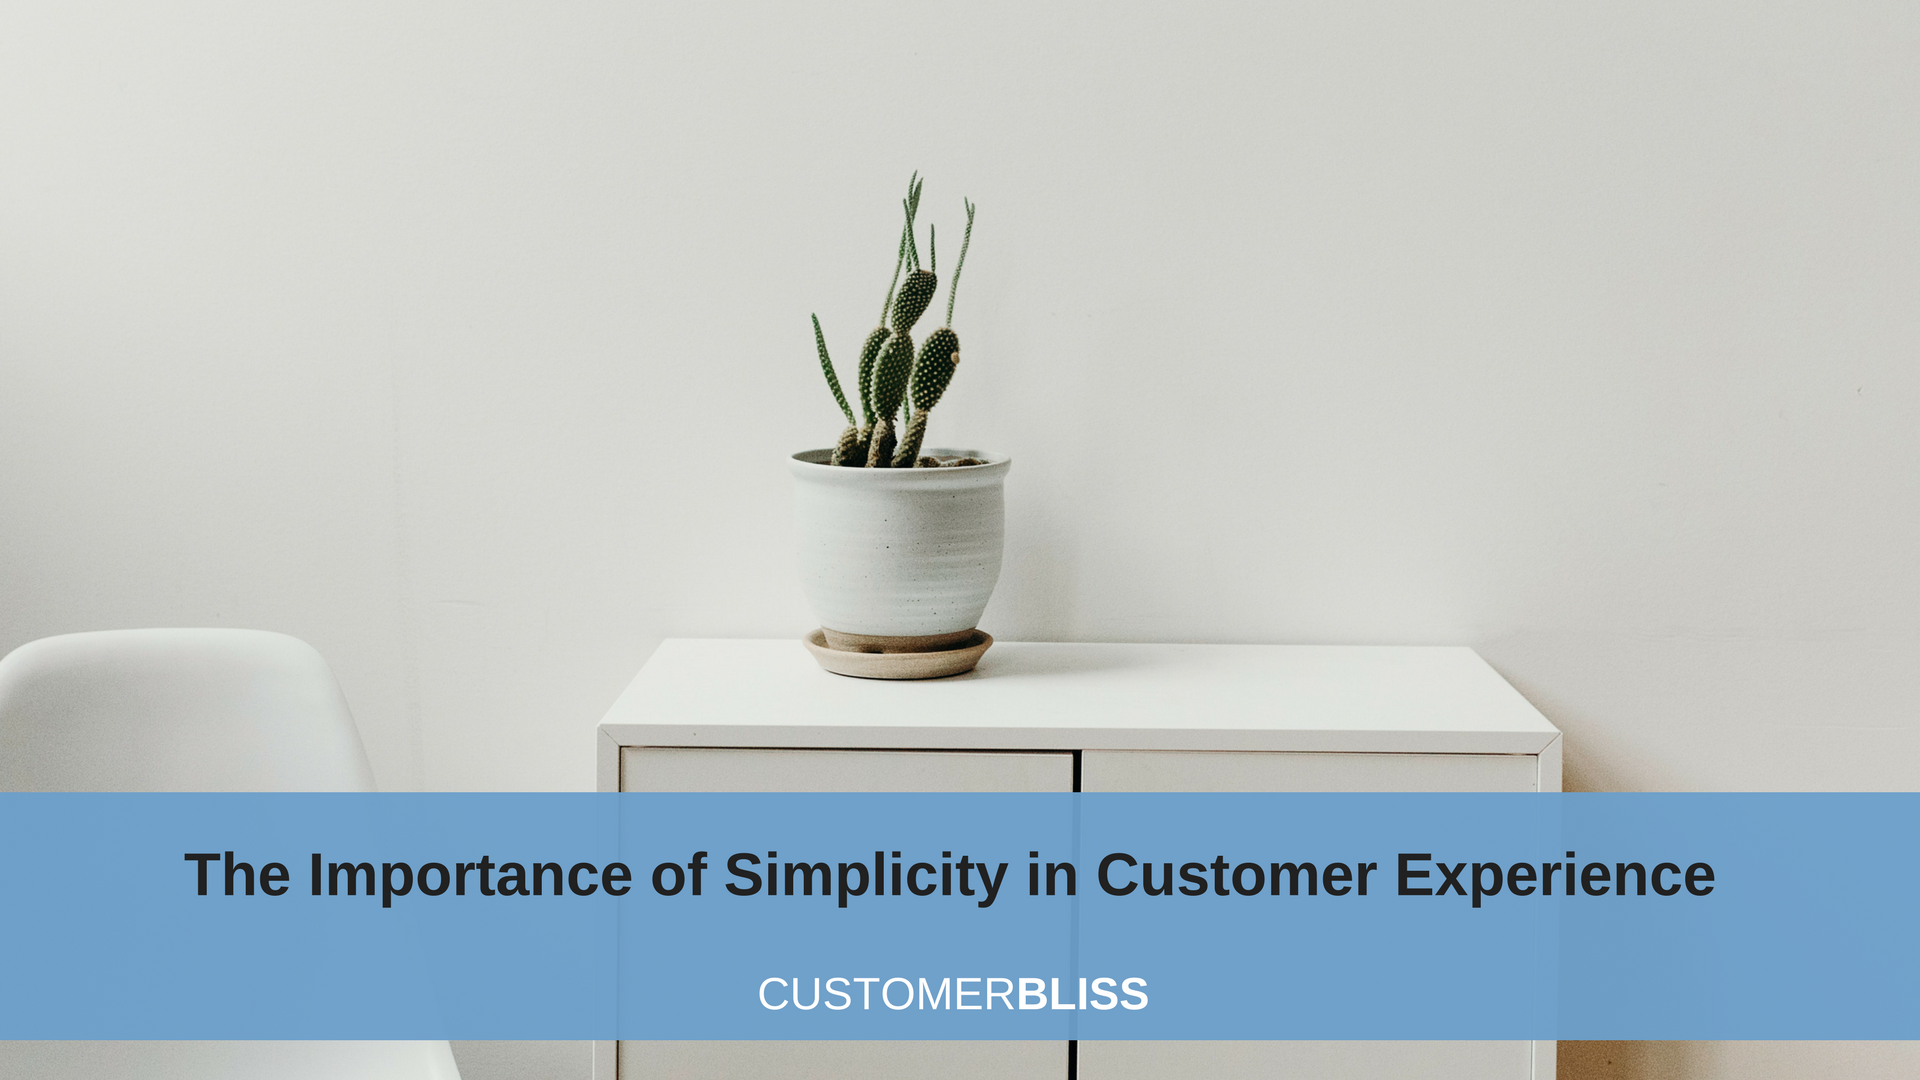 The Importance of Simplicity Customer Experience